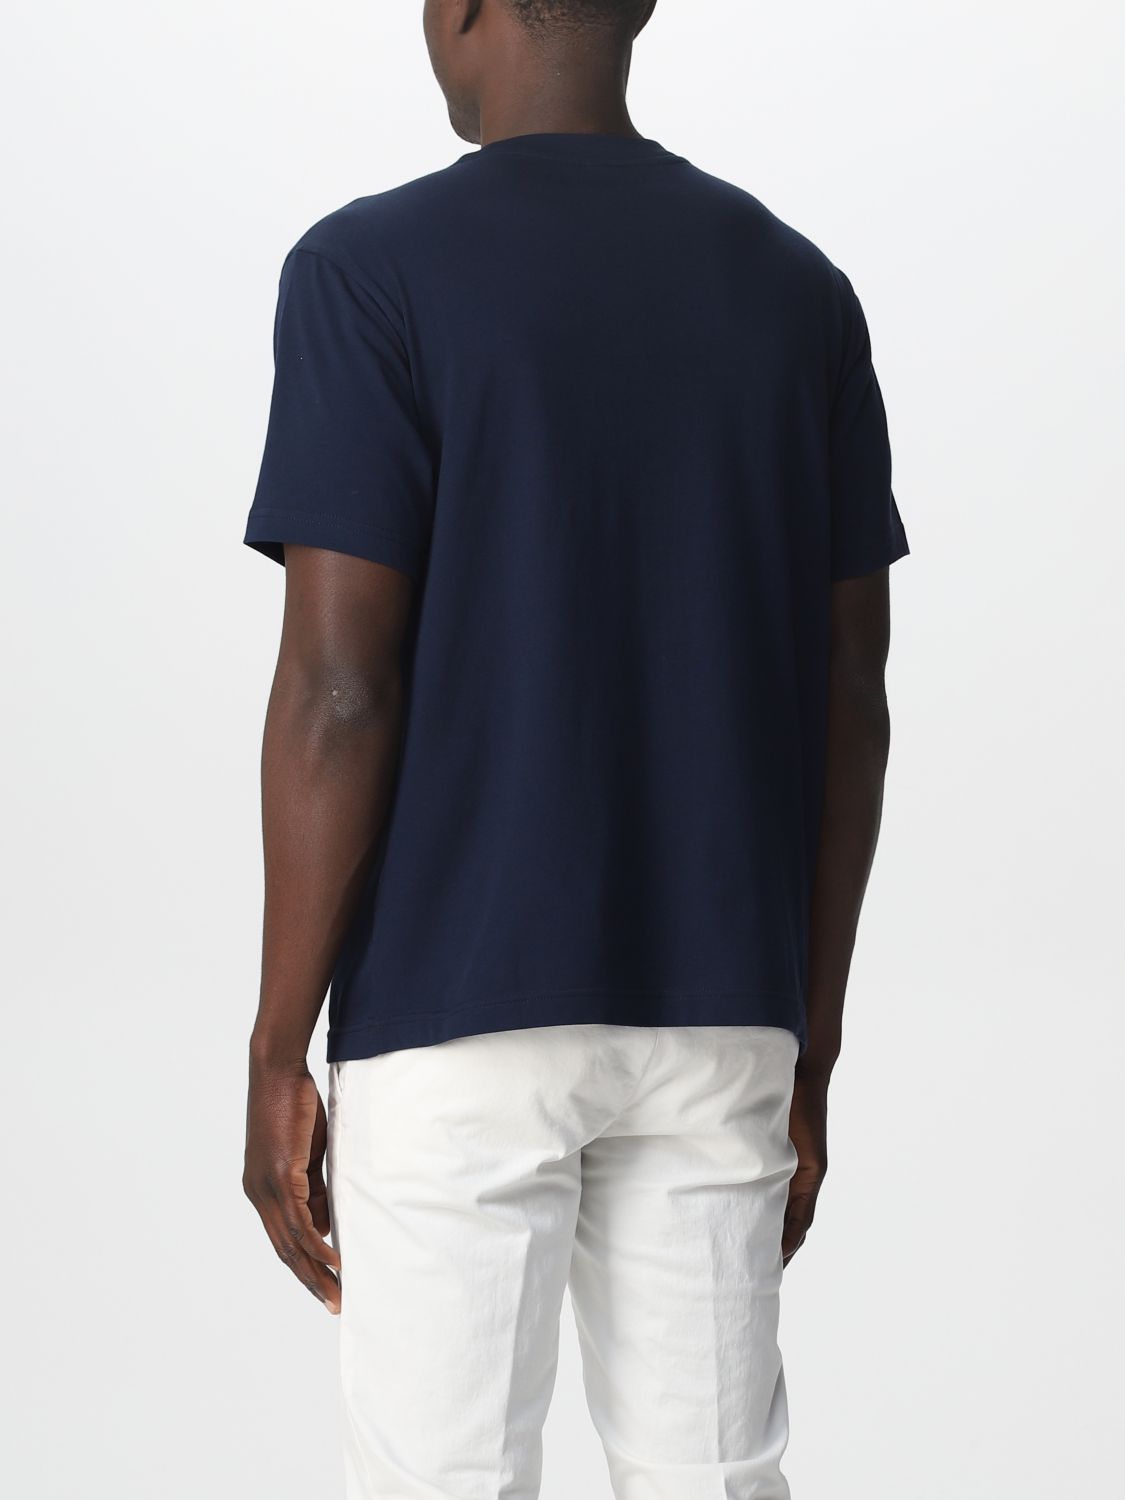 North Sails Outlet: cotton t-shirt with logo - Navy | North Sails t ...